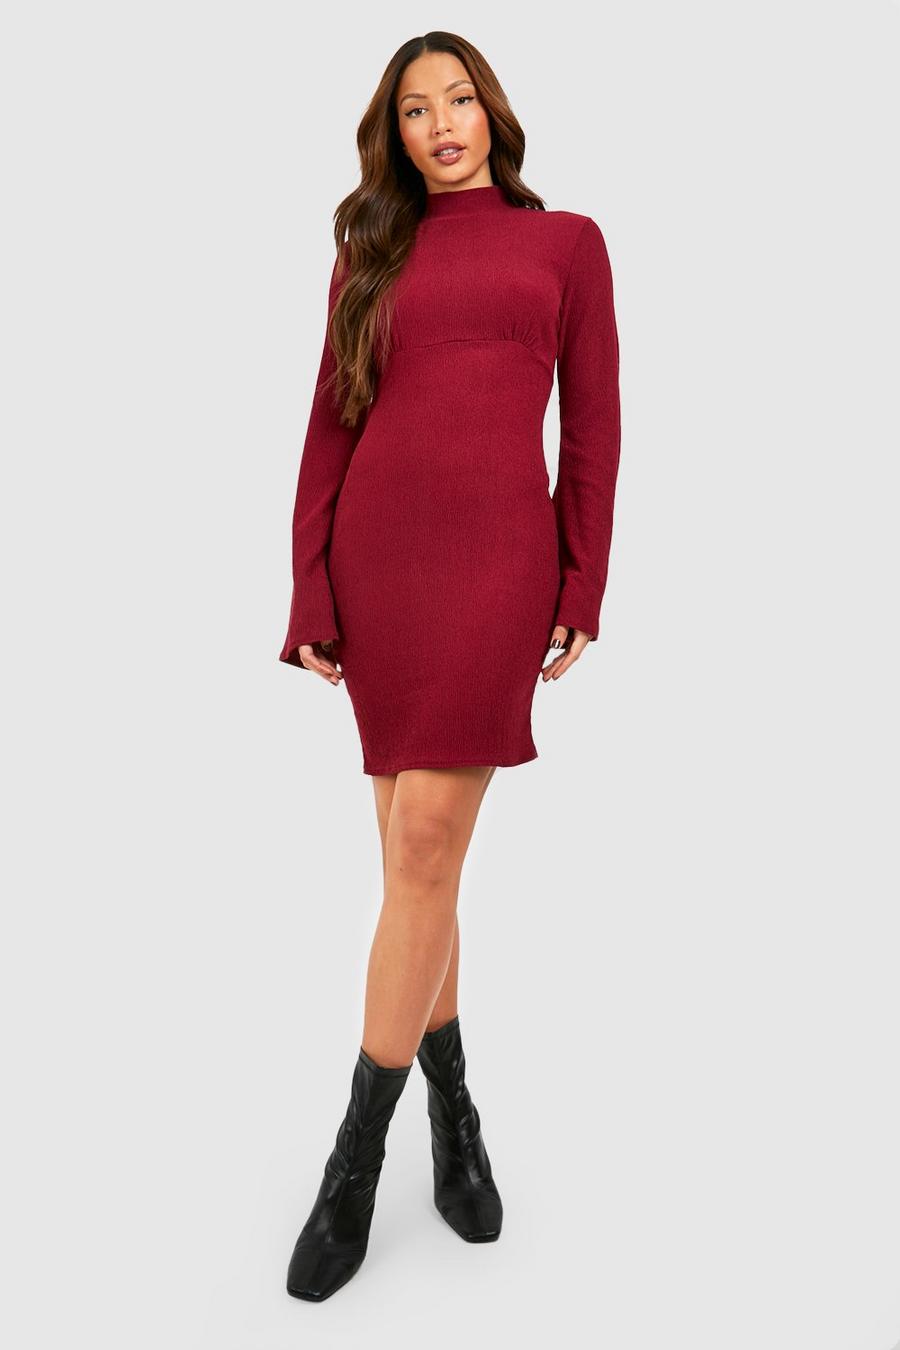 Berry red Tall High Neck Flare Sleeve Mini Shift Dress